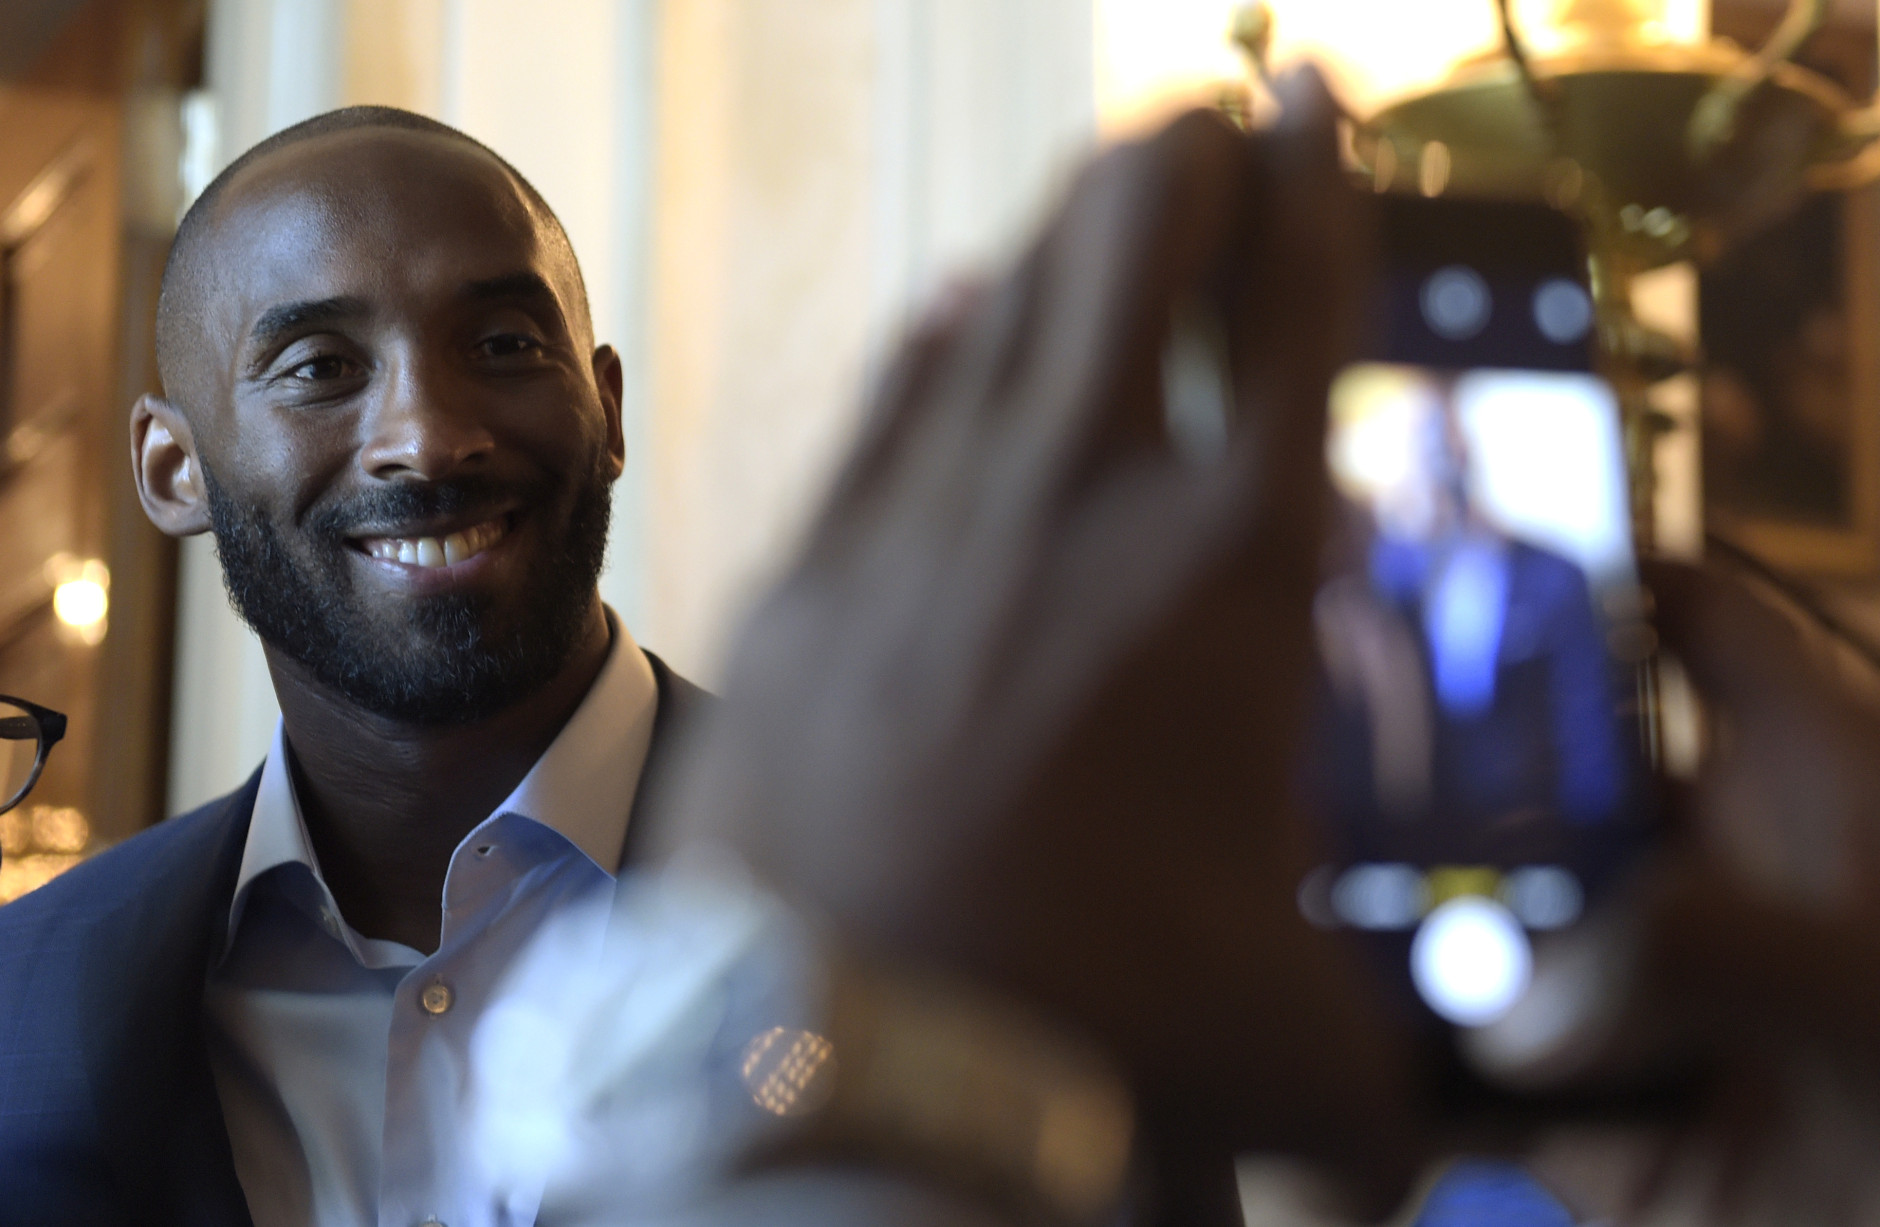 Kobe Bryant poses for a photo during a reception in the Grand Foyer of the White House in Washington, Friday, Sept. 23, 2016, for the opening of the Smithsonian's National Museum of African American History and Culture. (AP Photo/Susan Walsh)